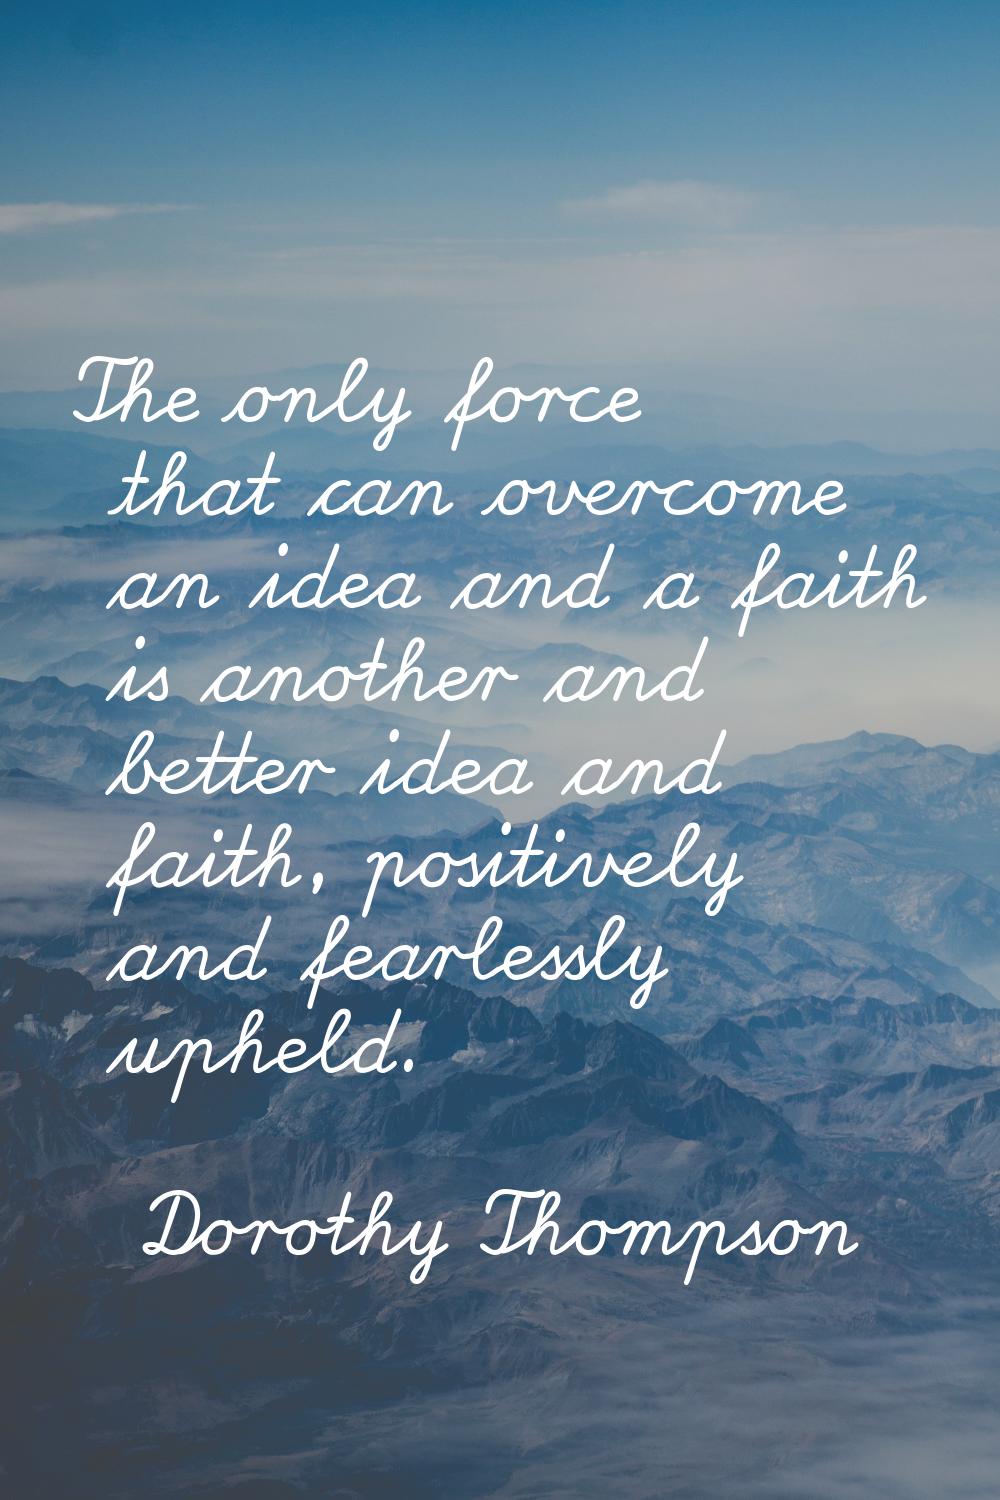 The only force that can overcome an idea and a faith is another and better idea and faith, positive